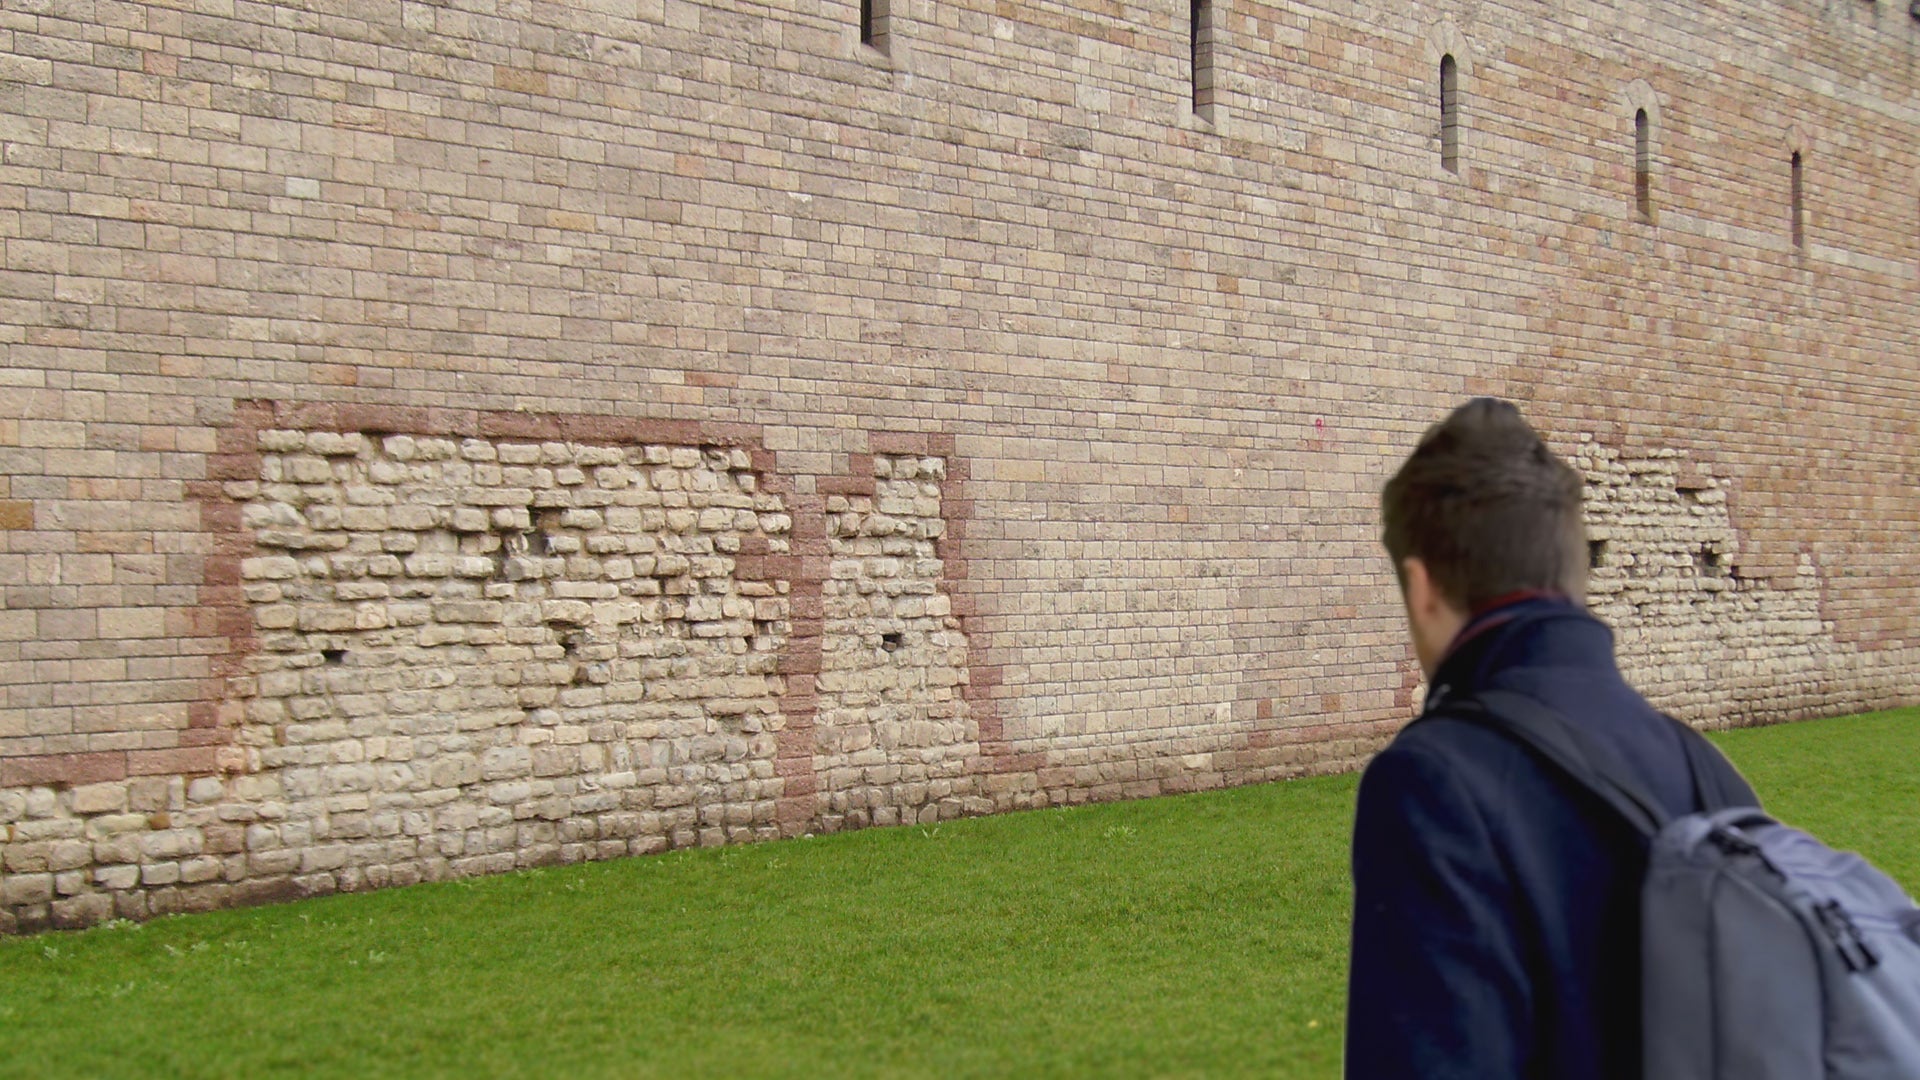 Chris Bratt in Cardiff looking at a wall